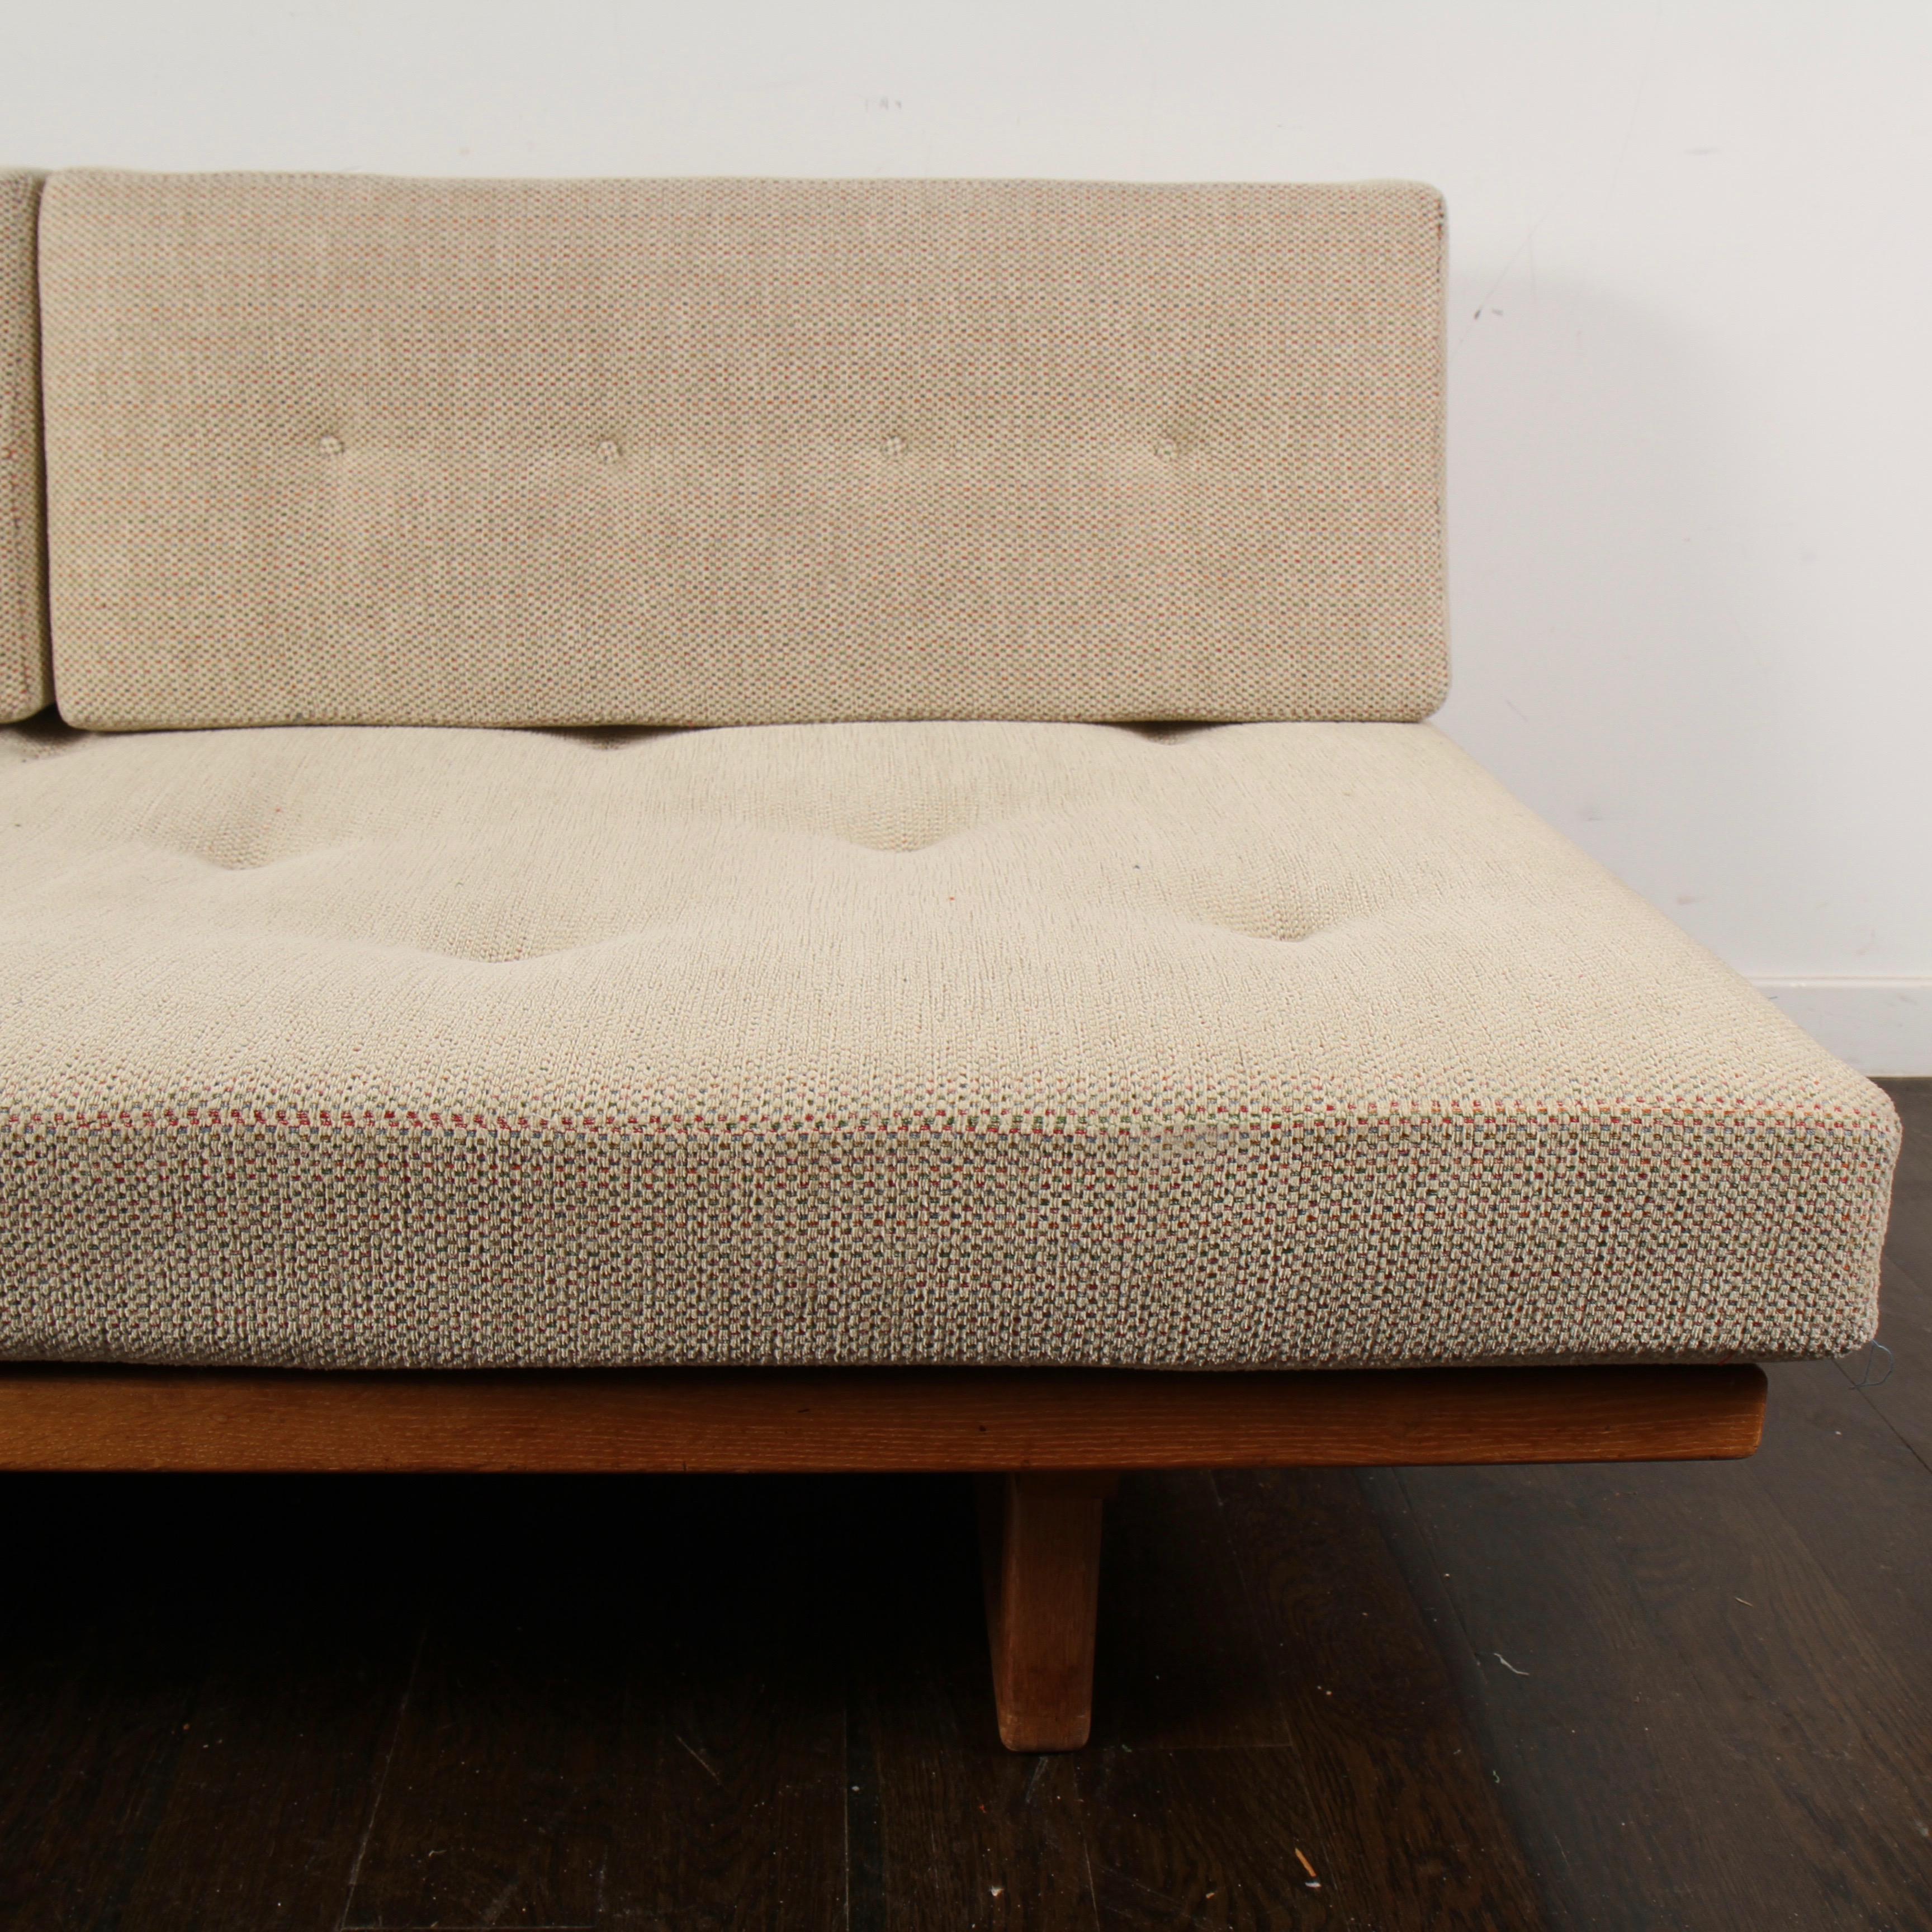 1950s vintage oak daybed/sofa designed by Børge Mogensen for Fredericia Stolefabrik in Denmark Original spring cushions are in good condition with clean presentable fabric. Can reupholster in your fabric for an additional $400. One of the few